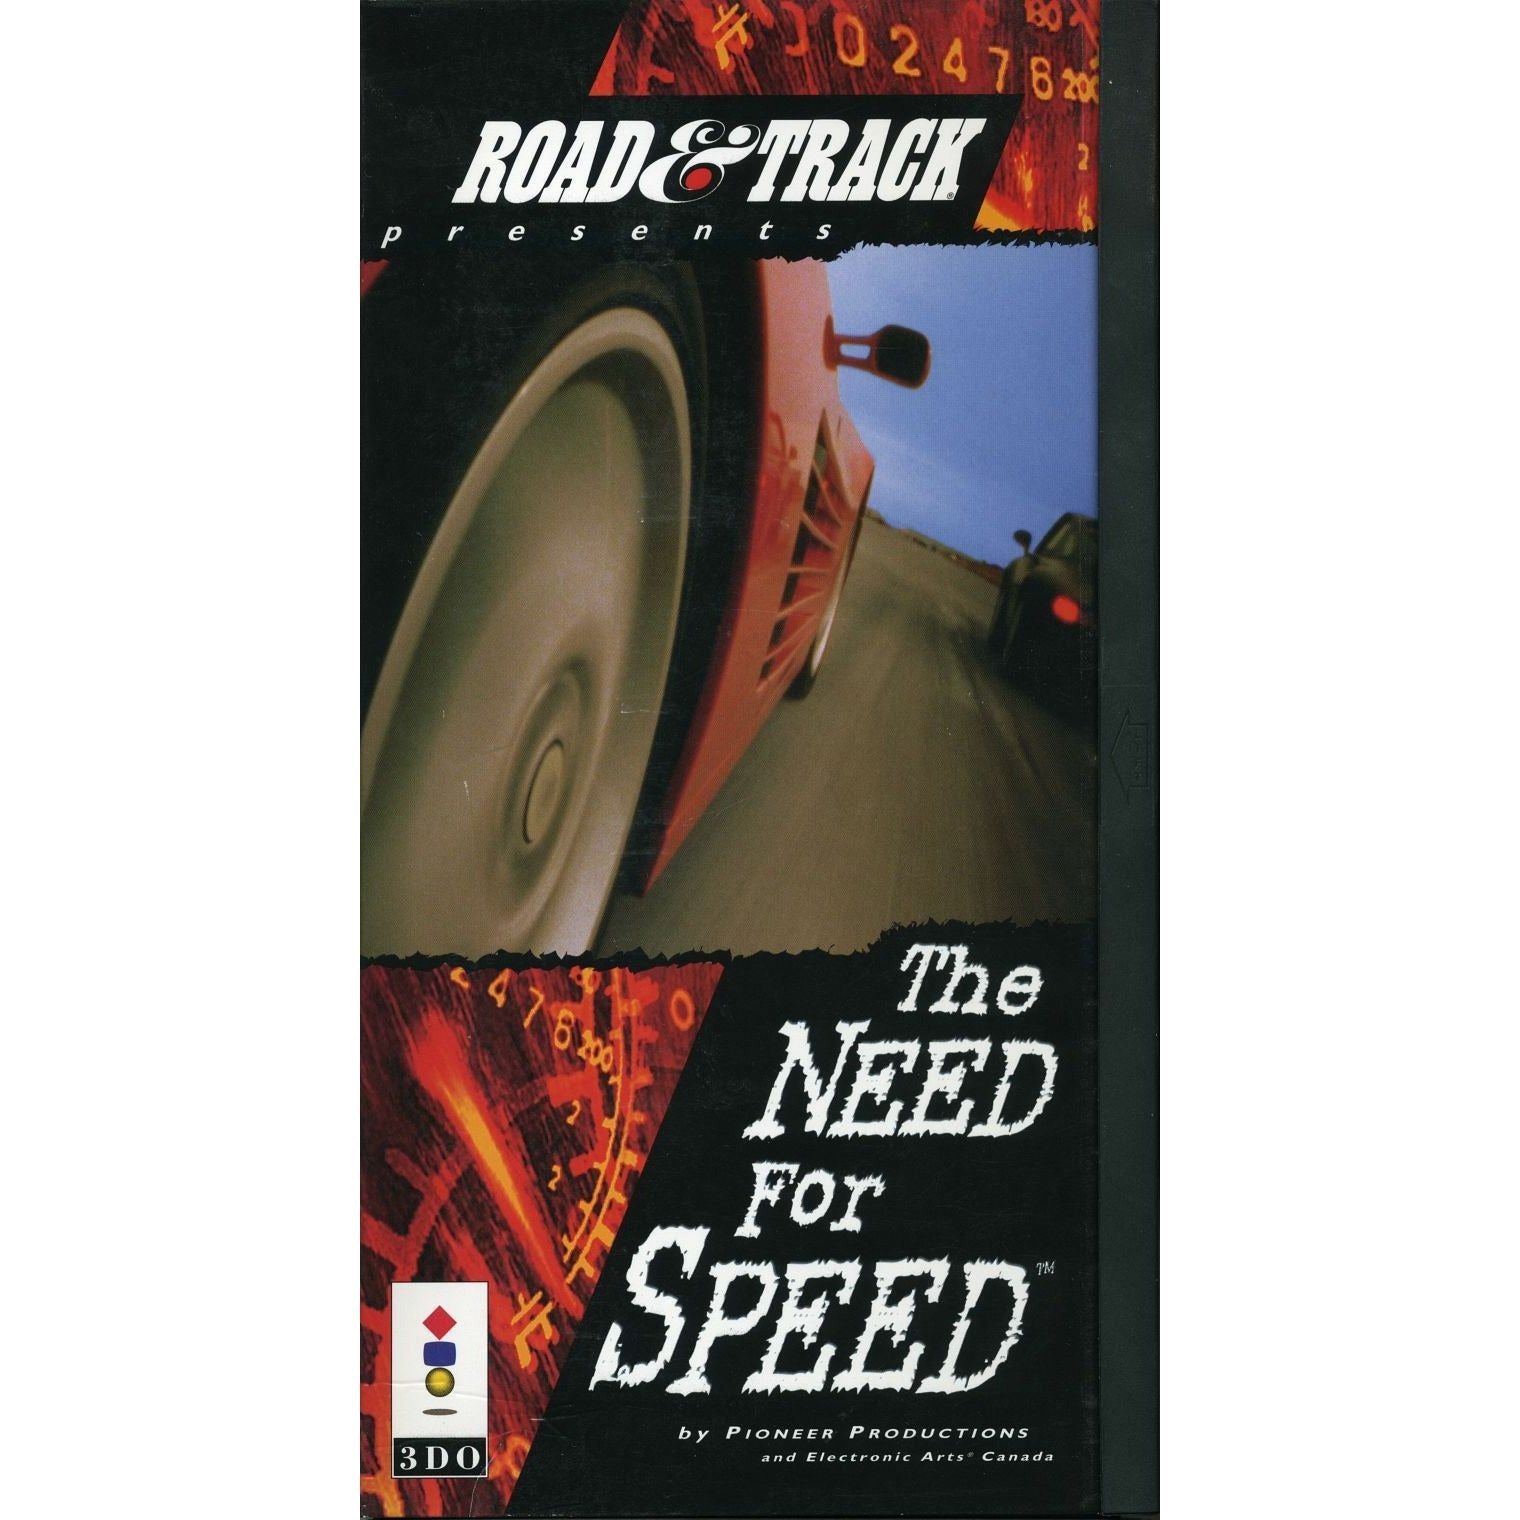 3DO - The Need for Speed (Longbox)